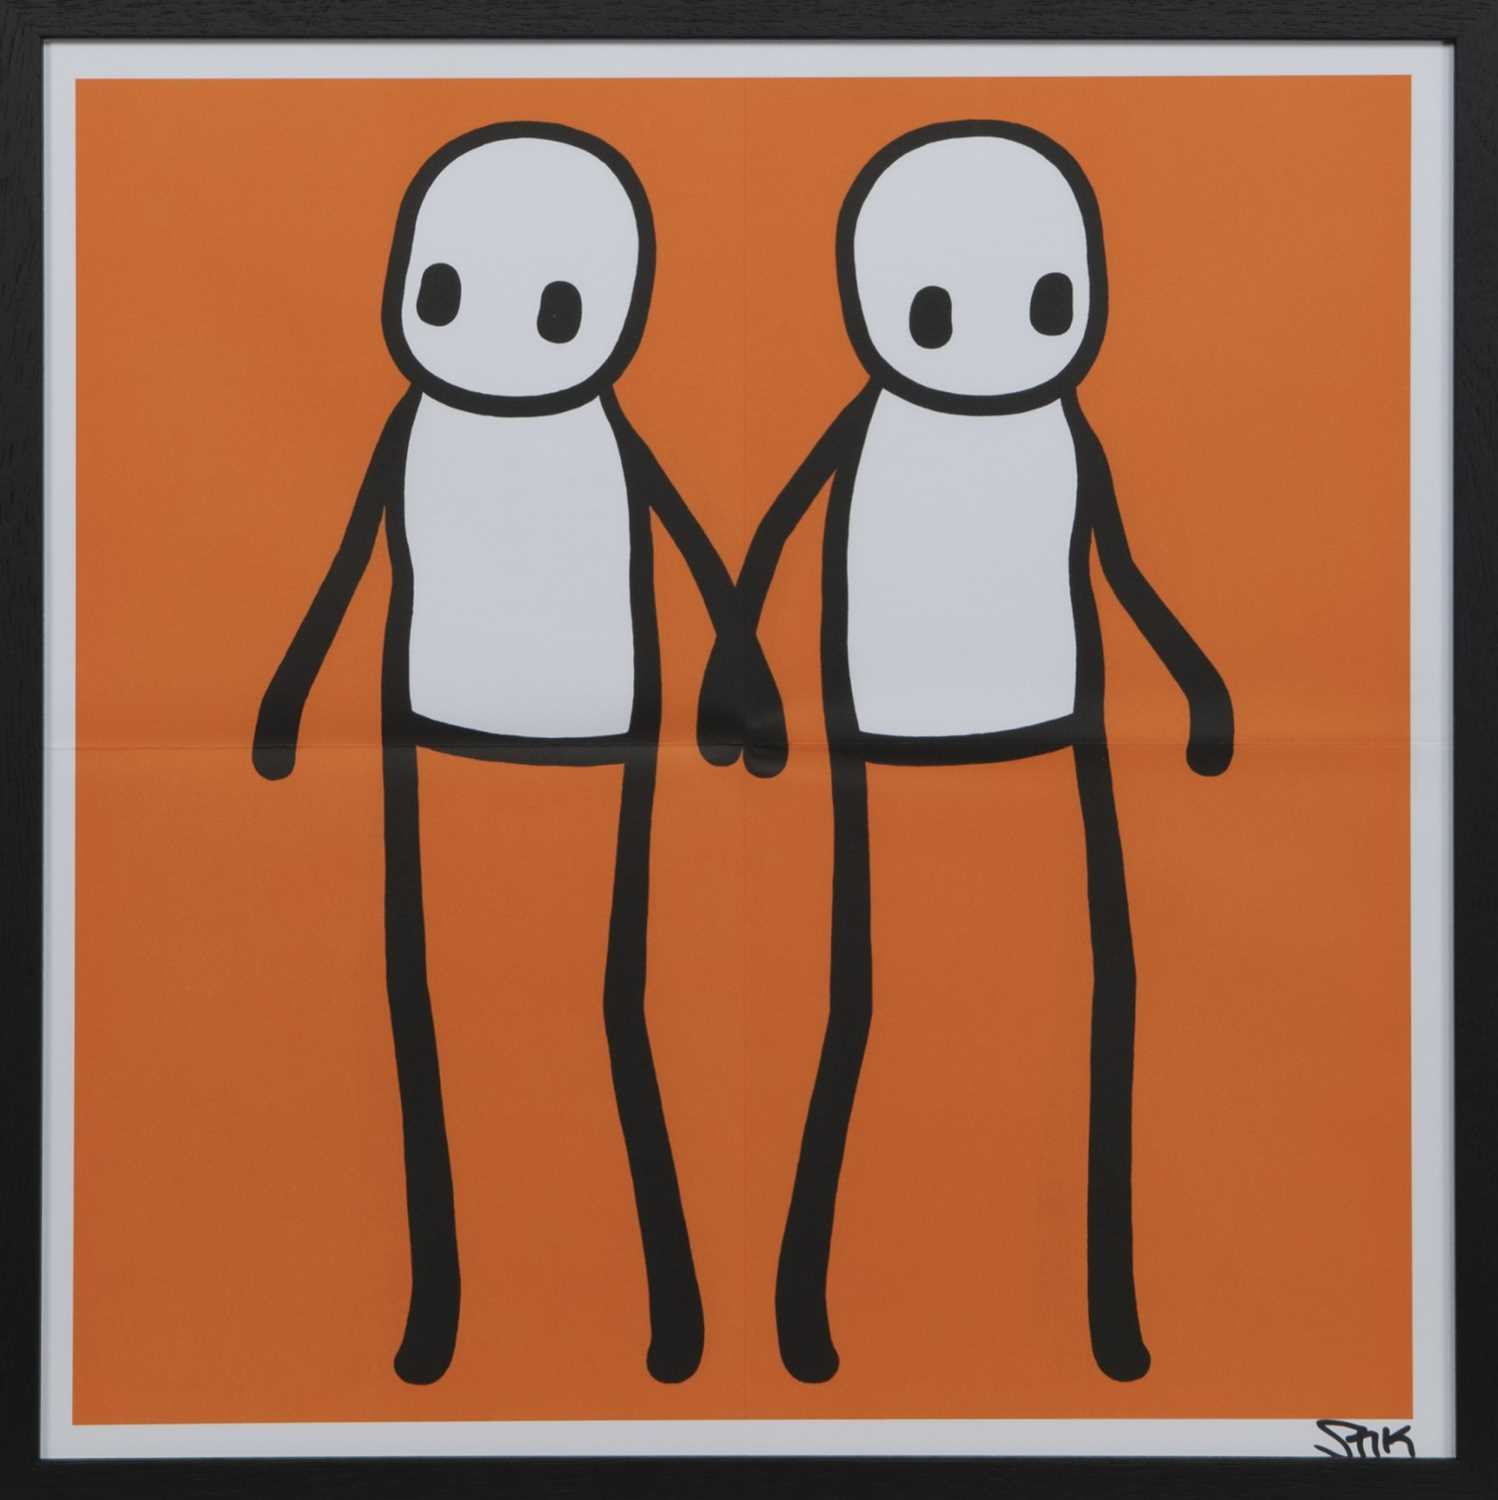 HOLDING HANDS (RED, ORANGE, YELLOW, BLUE & TEAL), LITHOGRAPHS BY STIK - Image 2 of 5